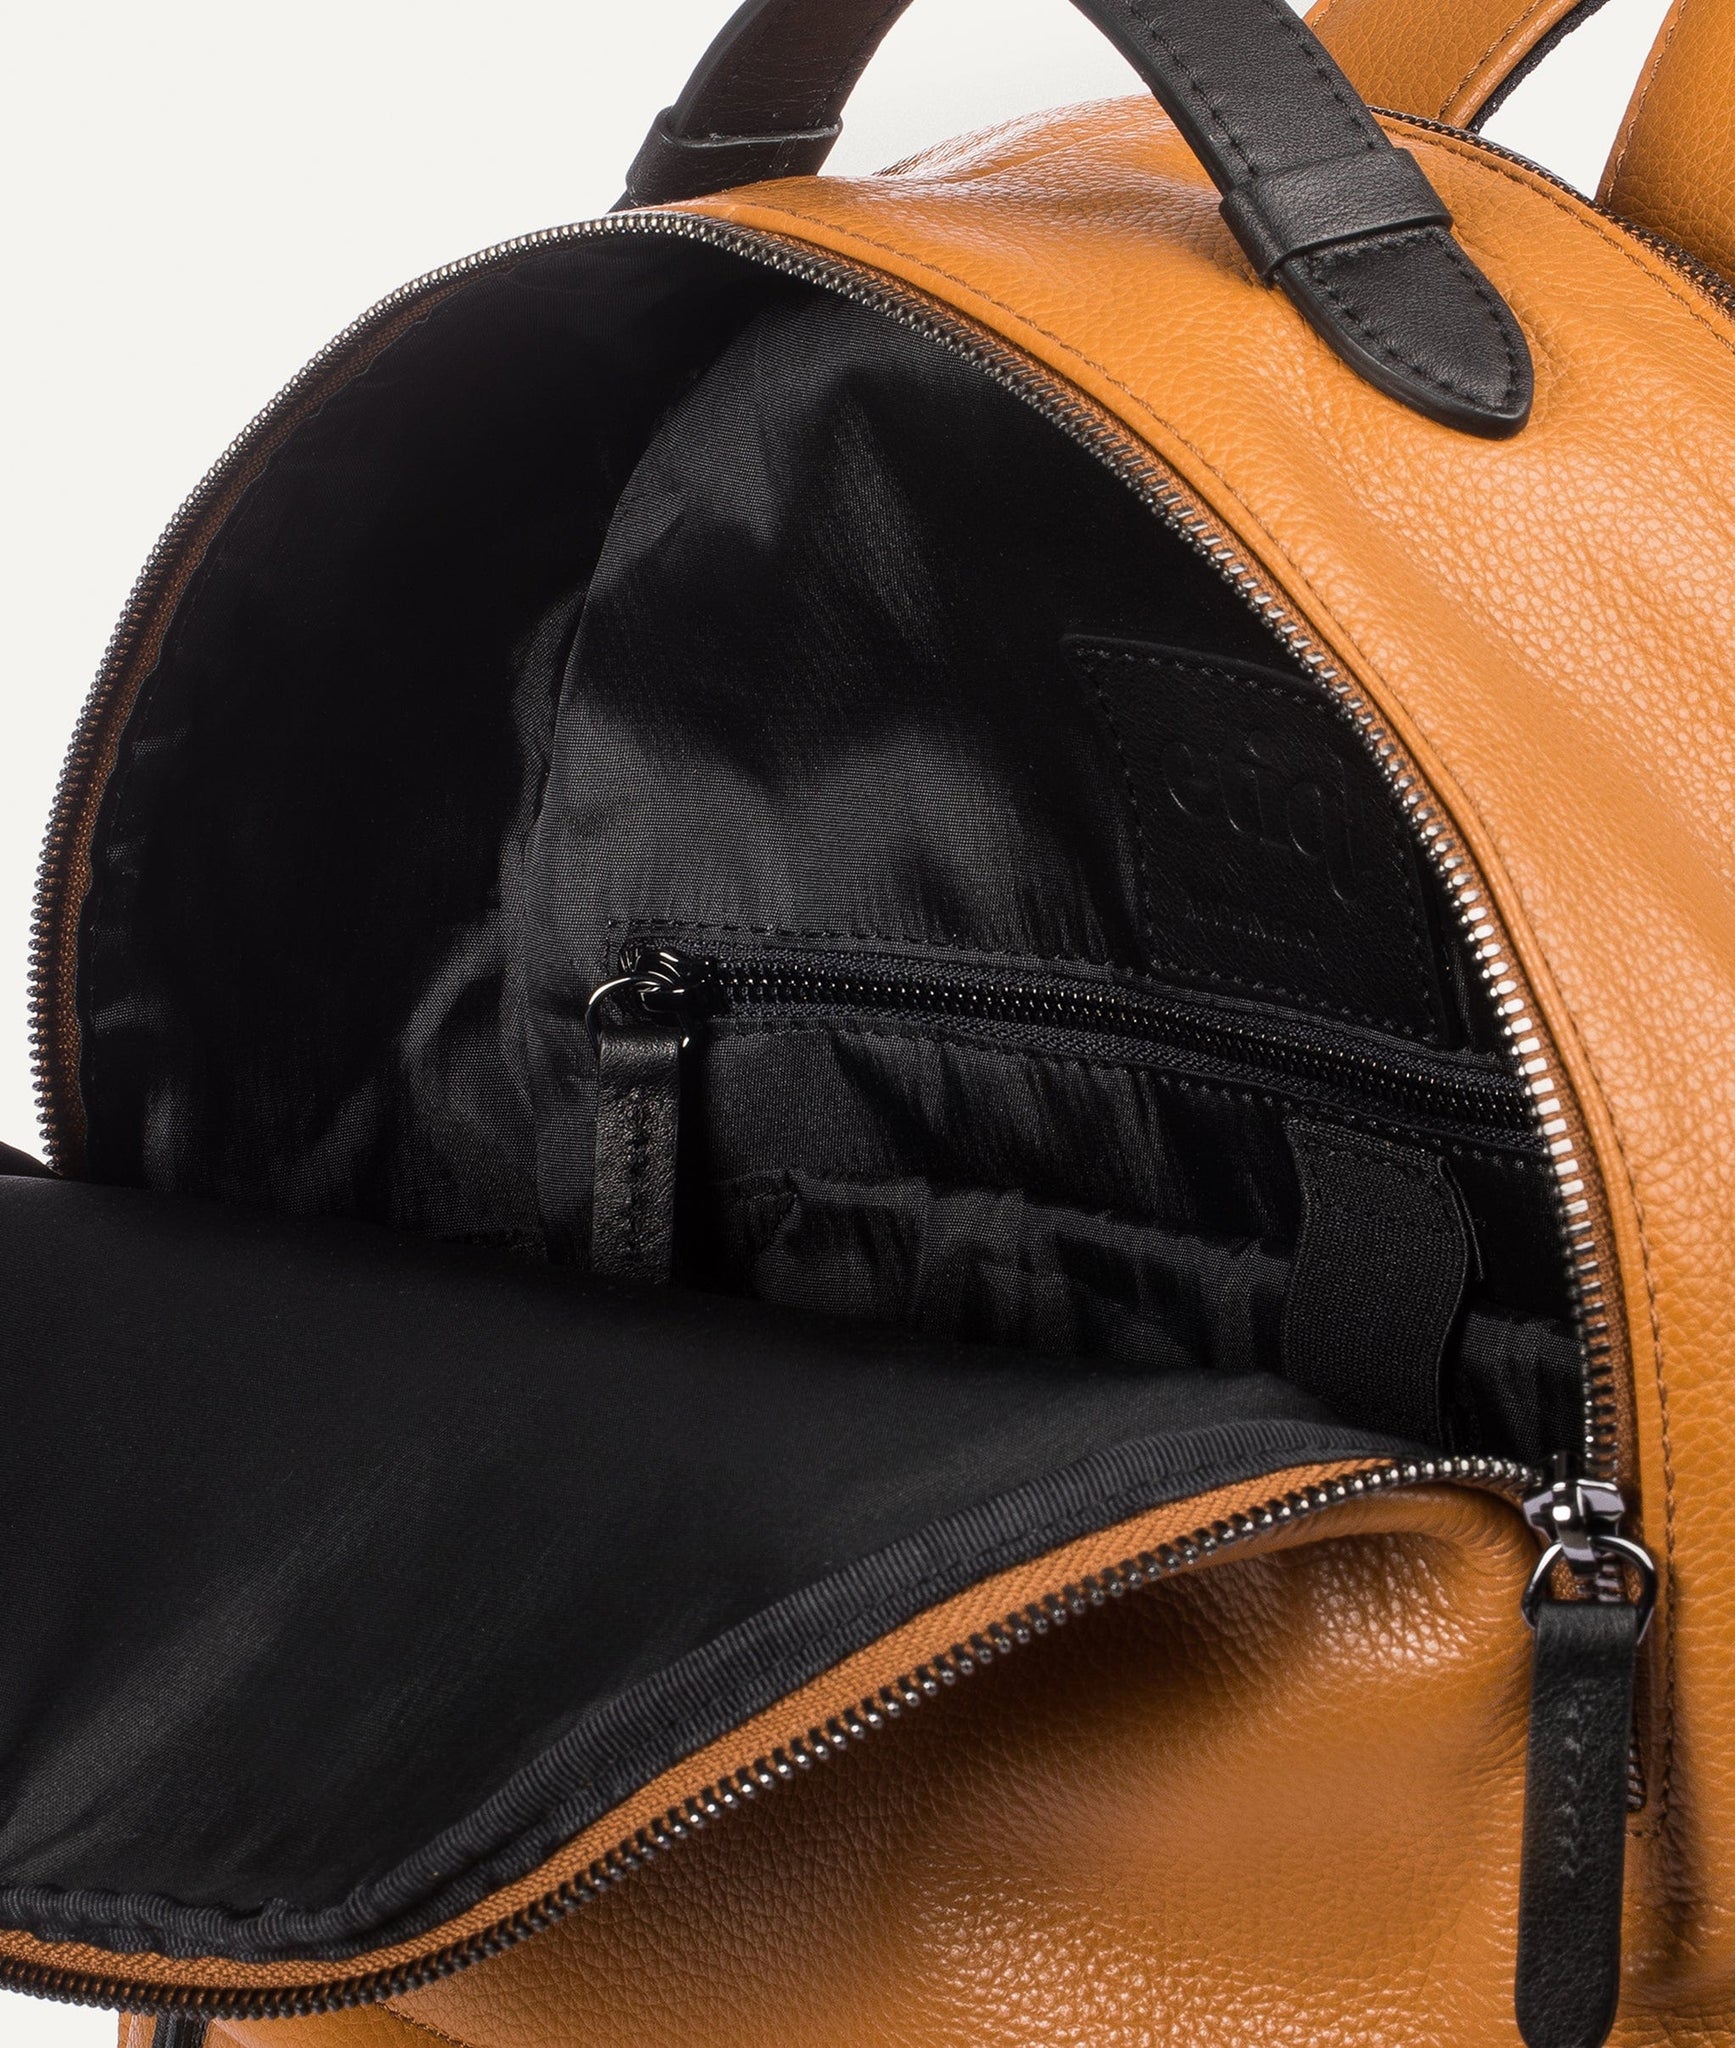 Backpack in Calf Leather